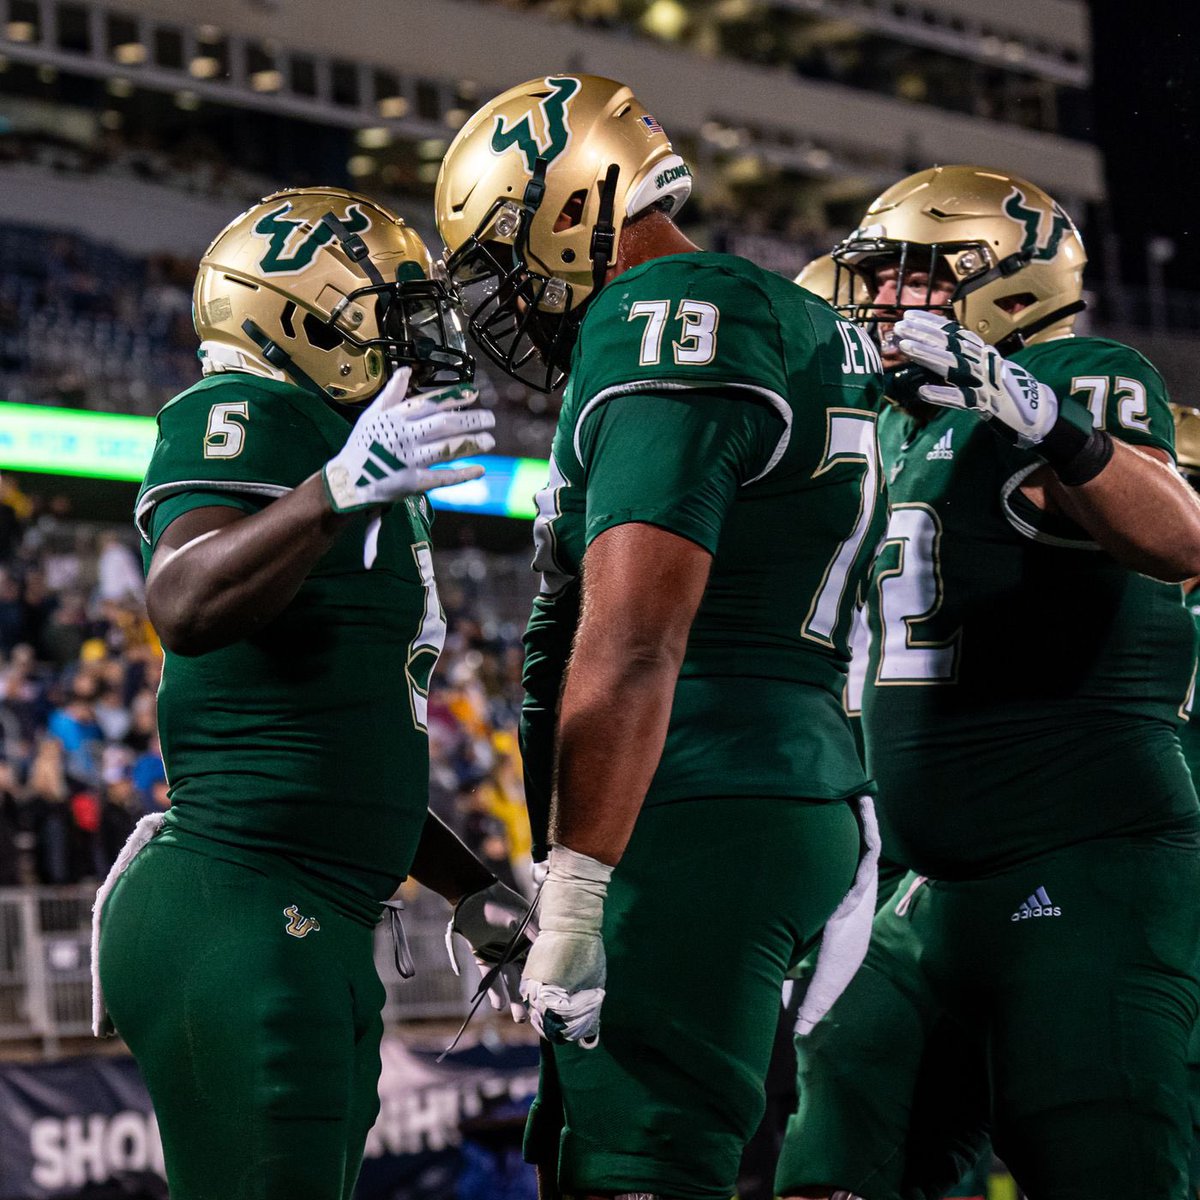 Blessed to receive a offer from the University of South Florida ! @ChadCreamer21 @CoachHoodie @Coach_FredM @CarterVikingsFB @lhsvikingsfbrec @RecruitGeorgia @adamgorney @JeremyO_Johnson @ChadSimmons_ @Velocity_FB